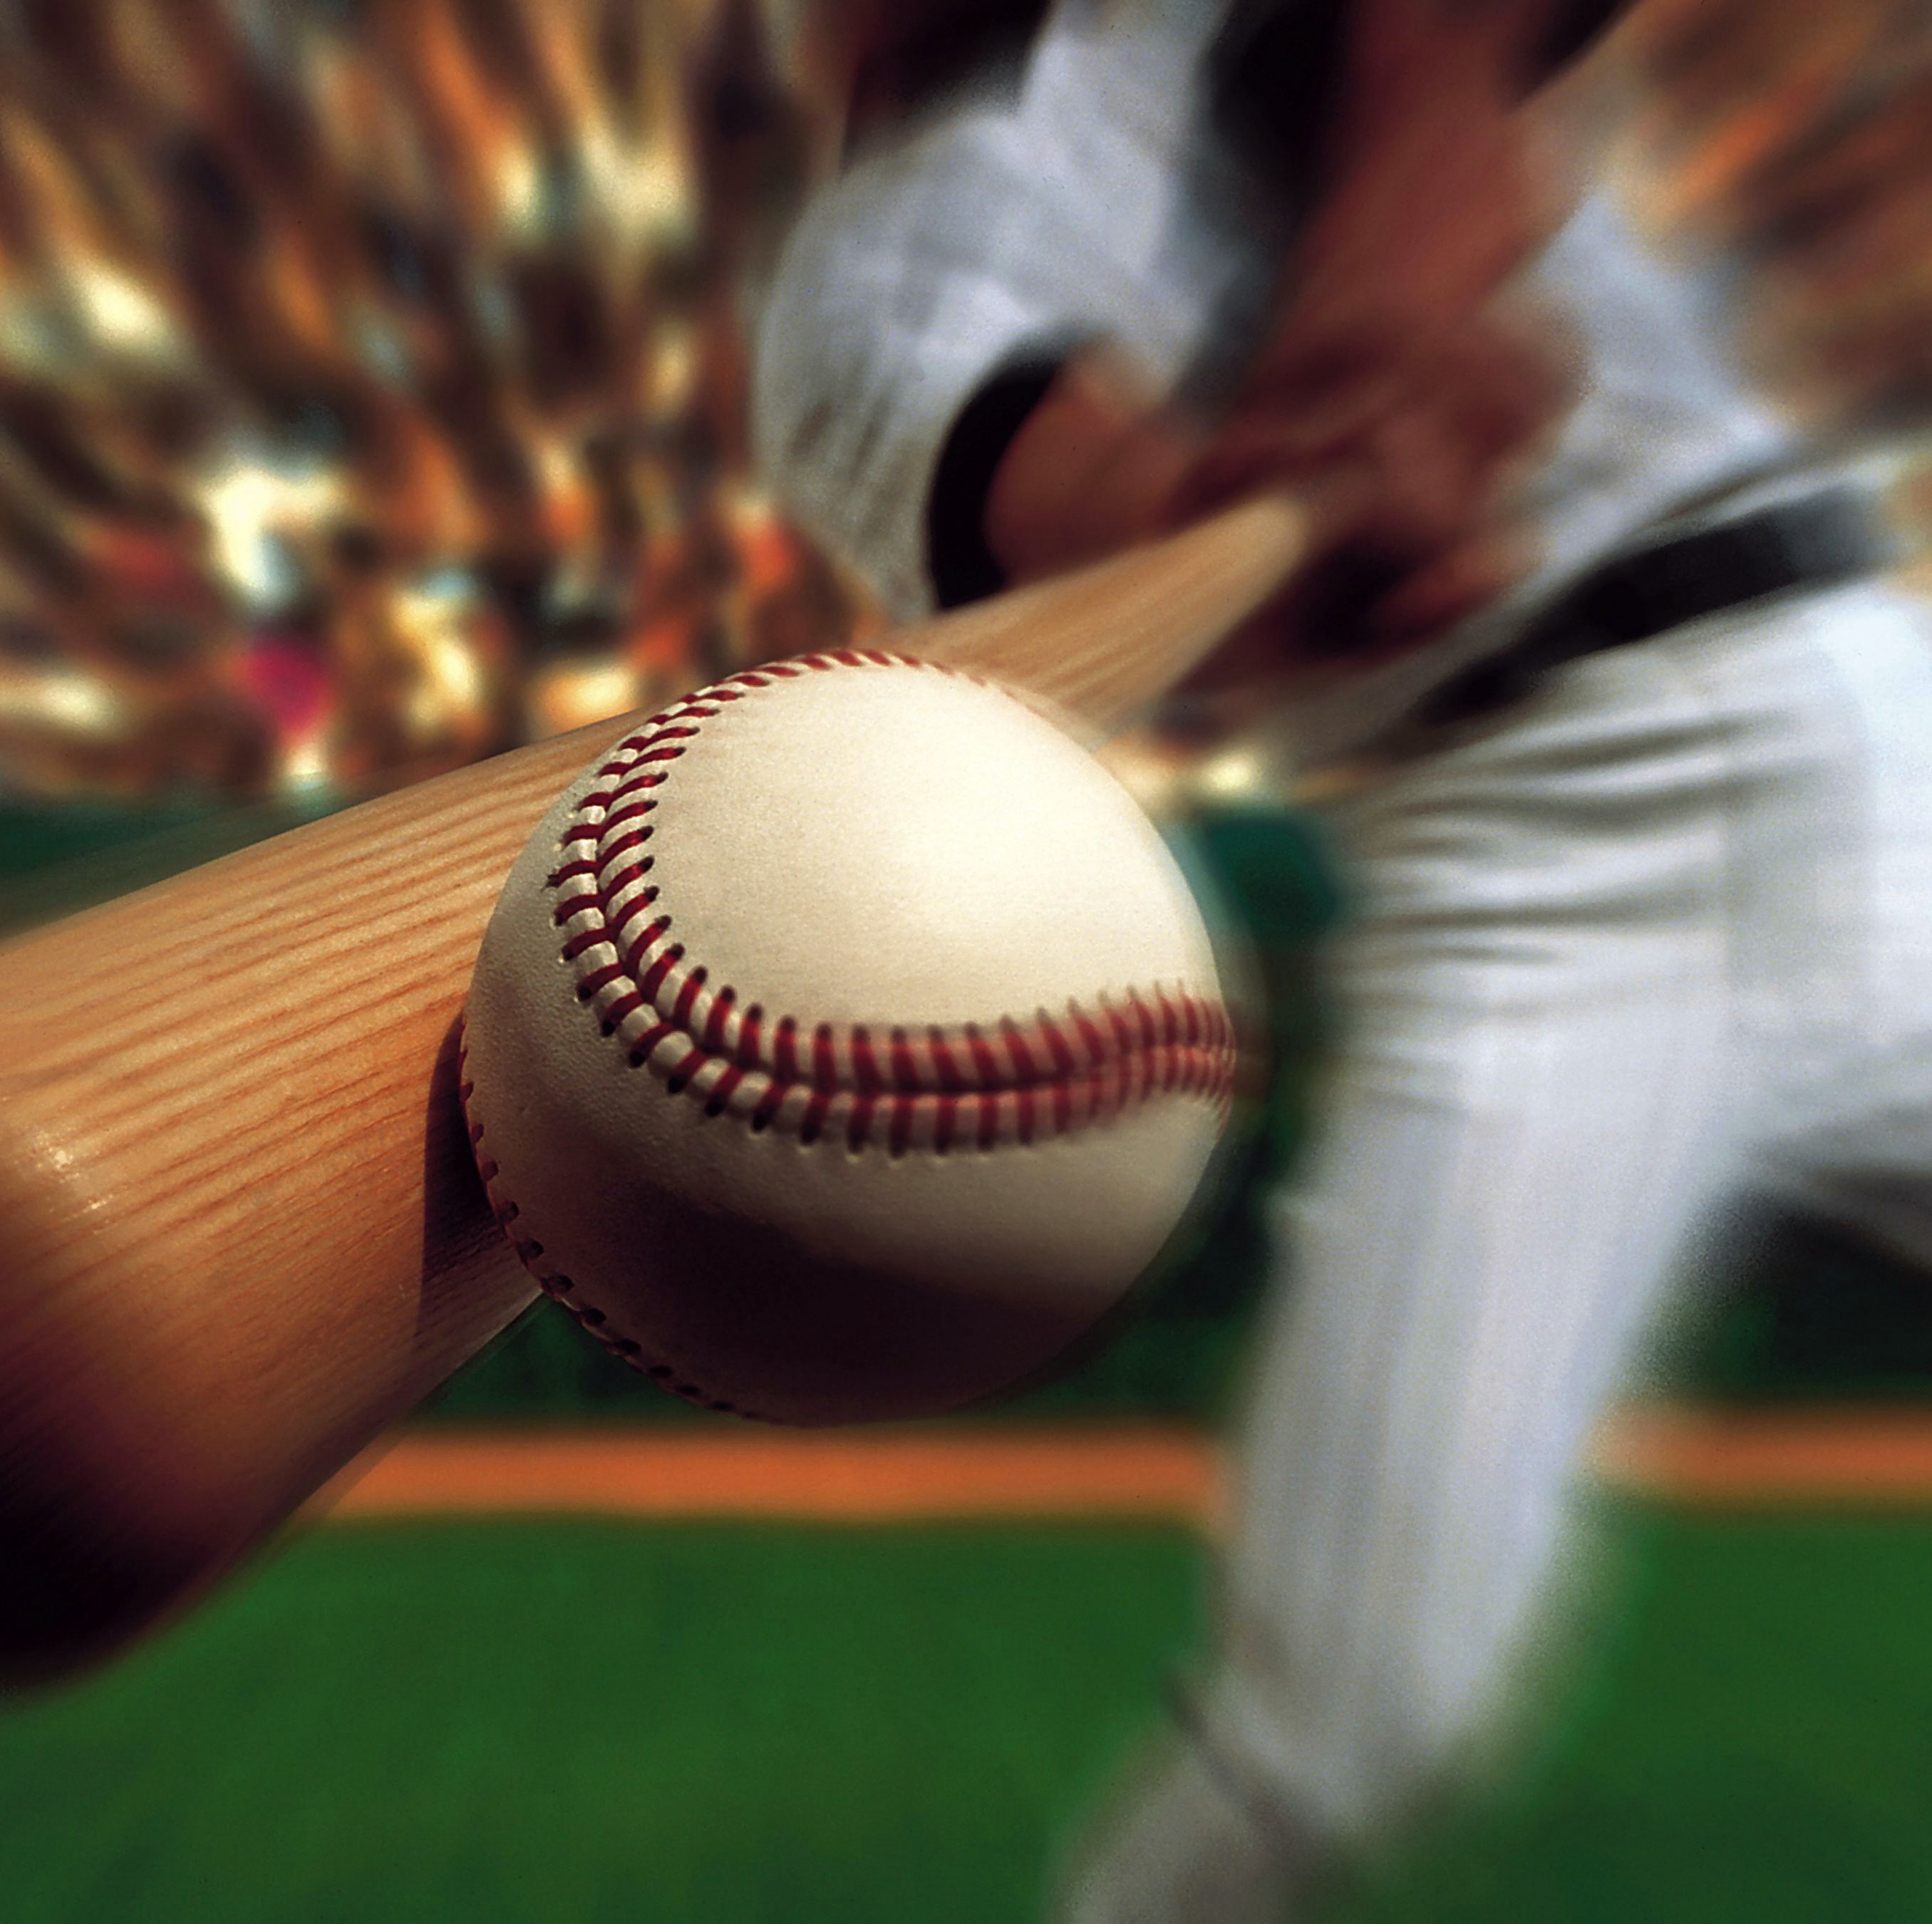 The Physics of How High—and How Far—Baseballs Can Travel